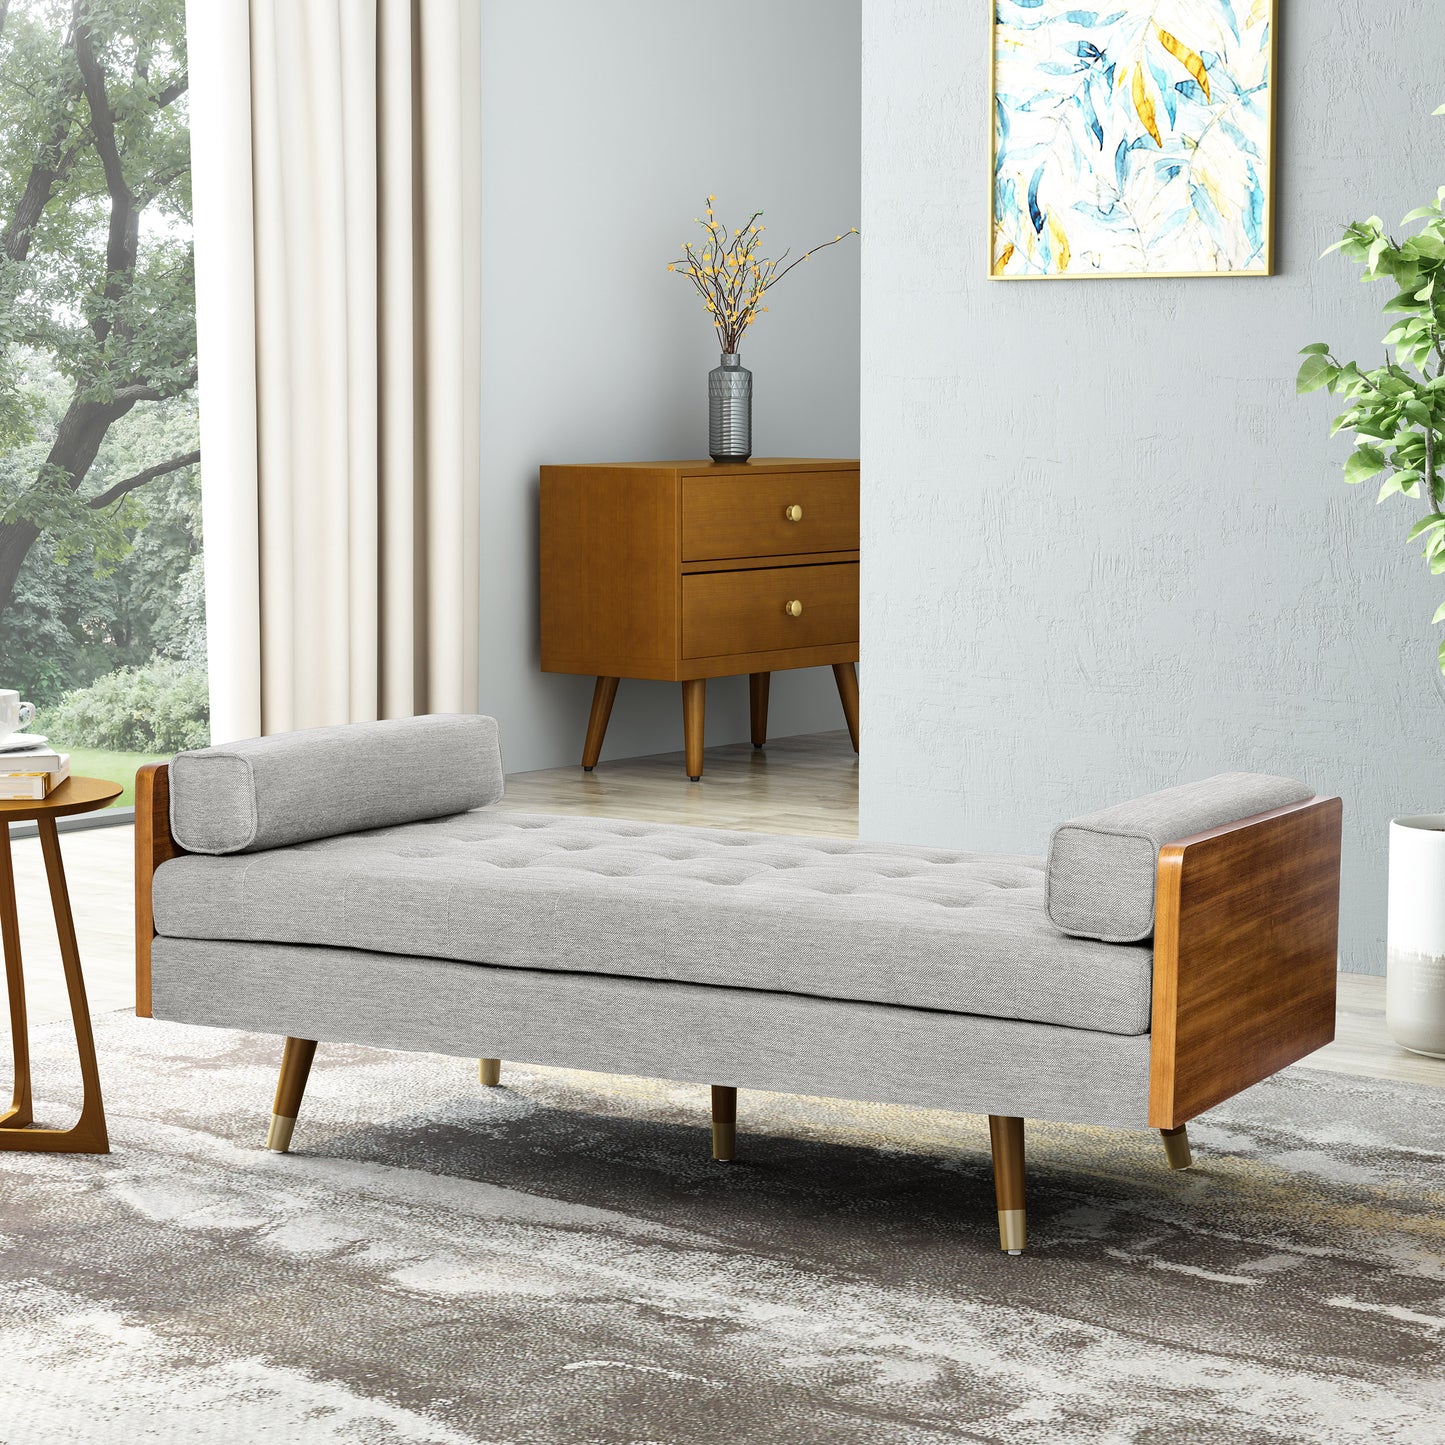 Tiltonsville Mid-Century Modern Tufted Double End Chaise Lounge with Bolster Pillows